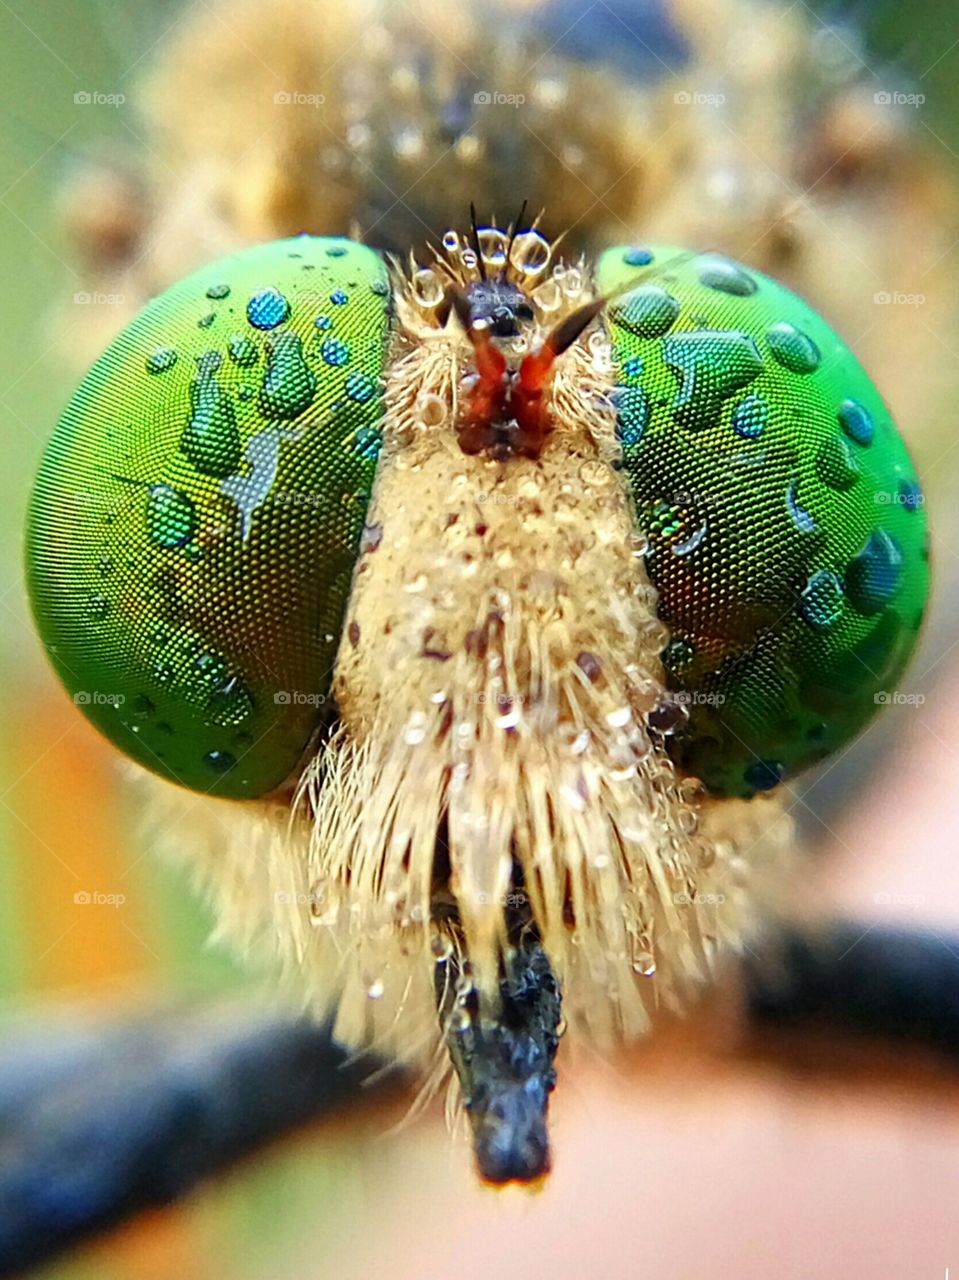 Robberfly's Face